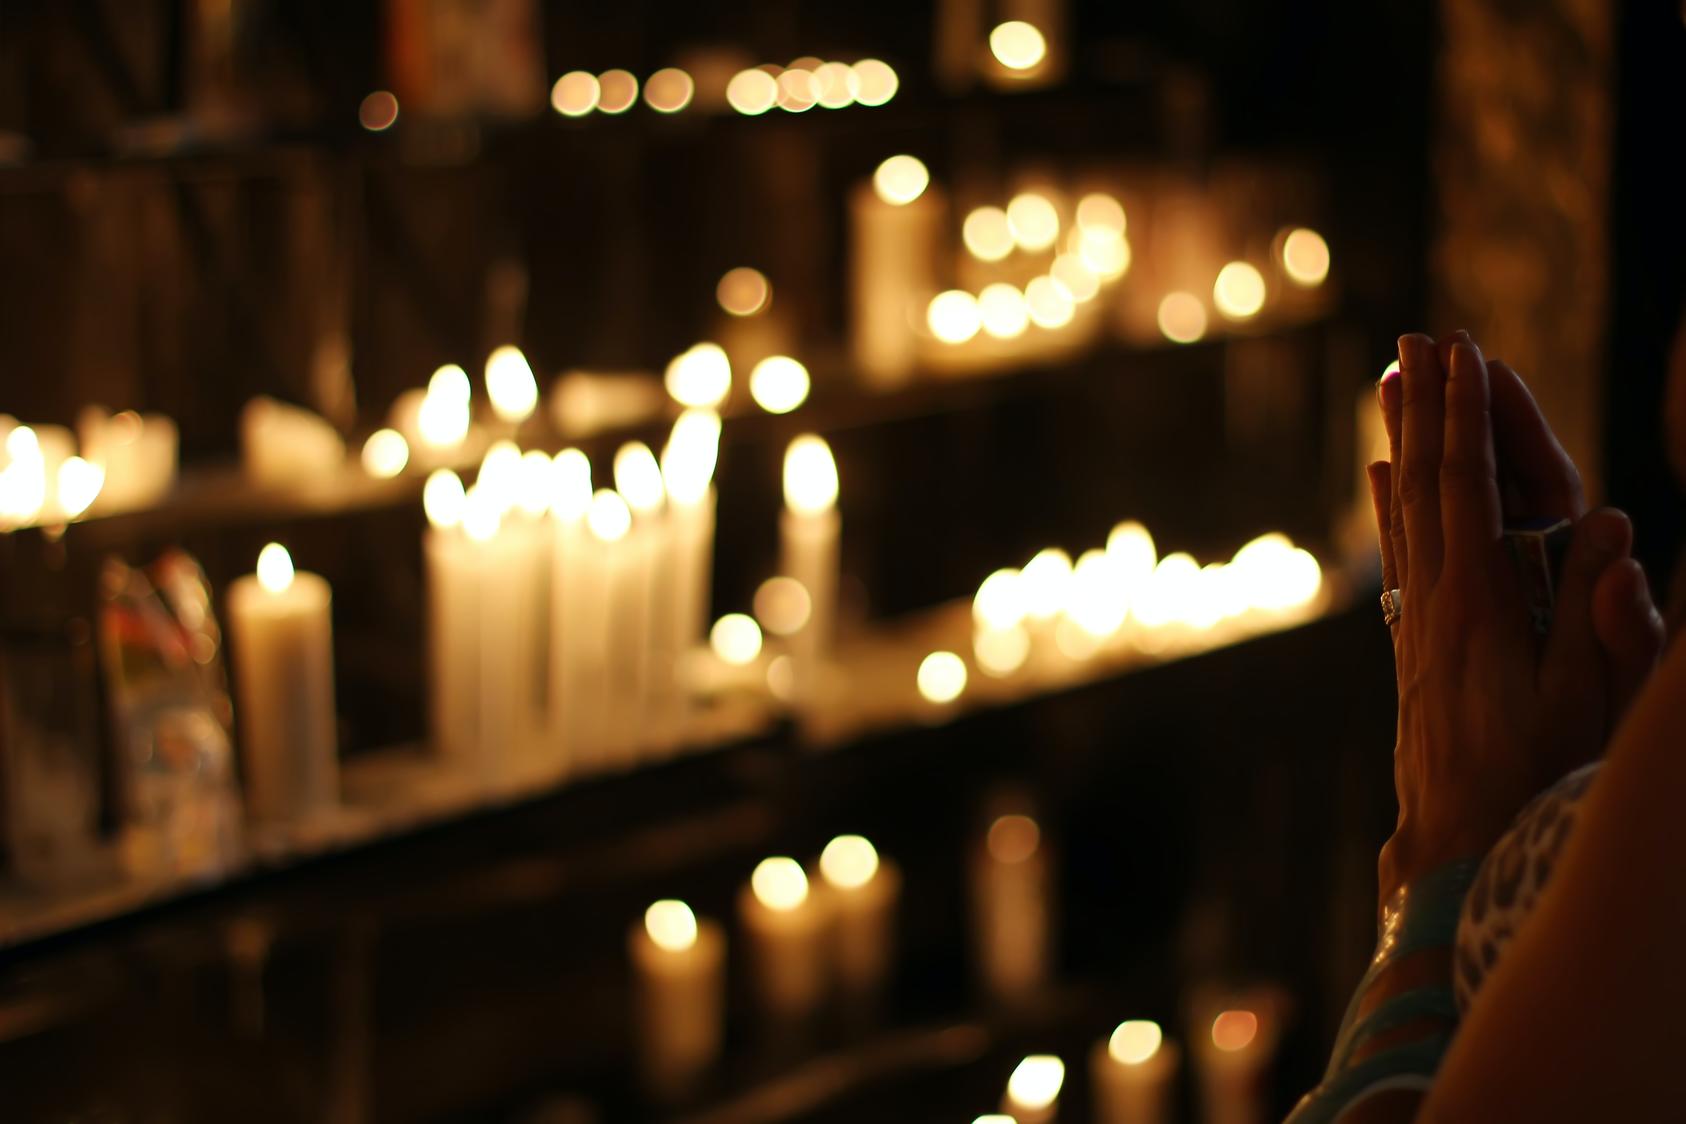 A person worships near lit candles.